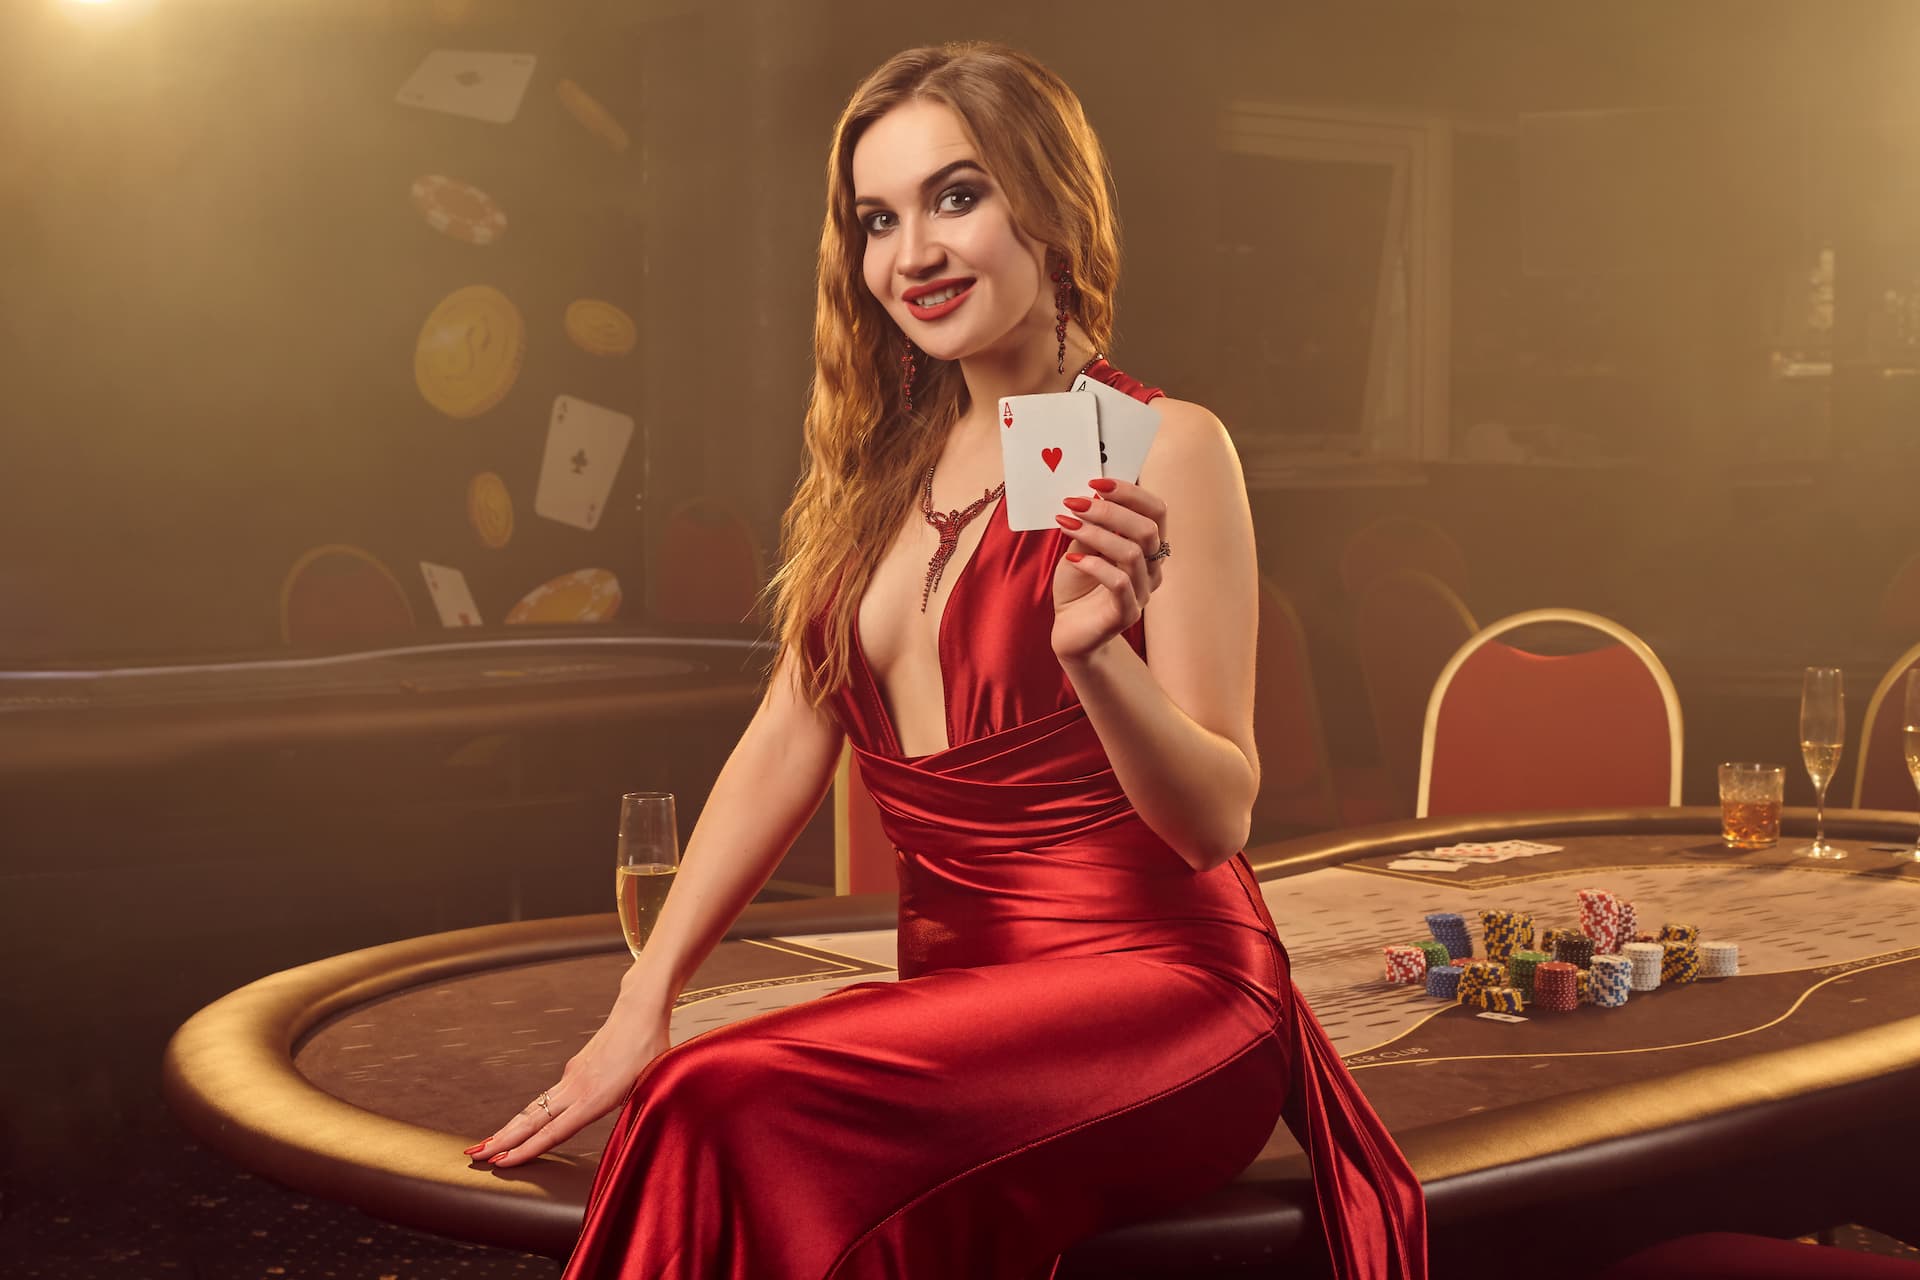 close-up-shot-of-a-wonderful-blond-girl-in-a-long-red-satin-dress-with-two-aces-in-her-hand-posing-sitting-on-a-poker-table-in-luxury-casino-passion-cards-chips-alcohol-win-gambling-it-is-a-f